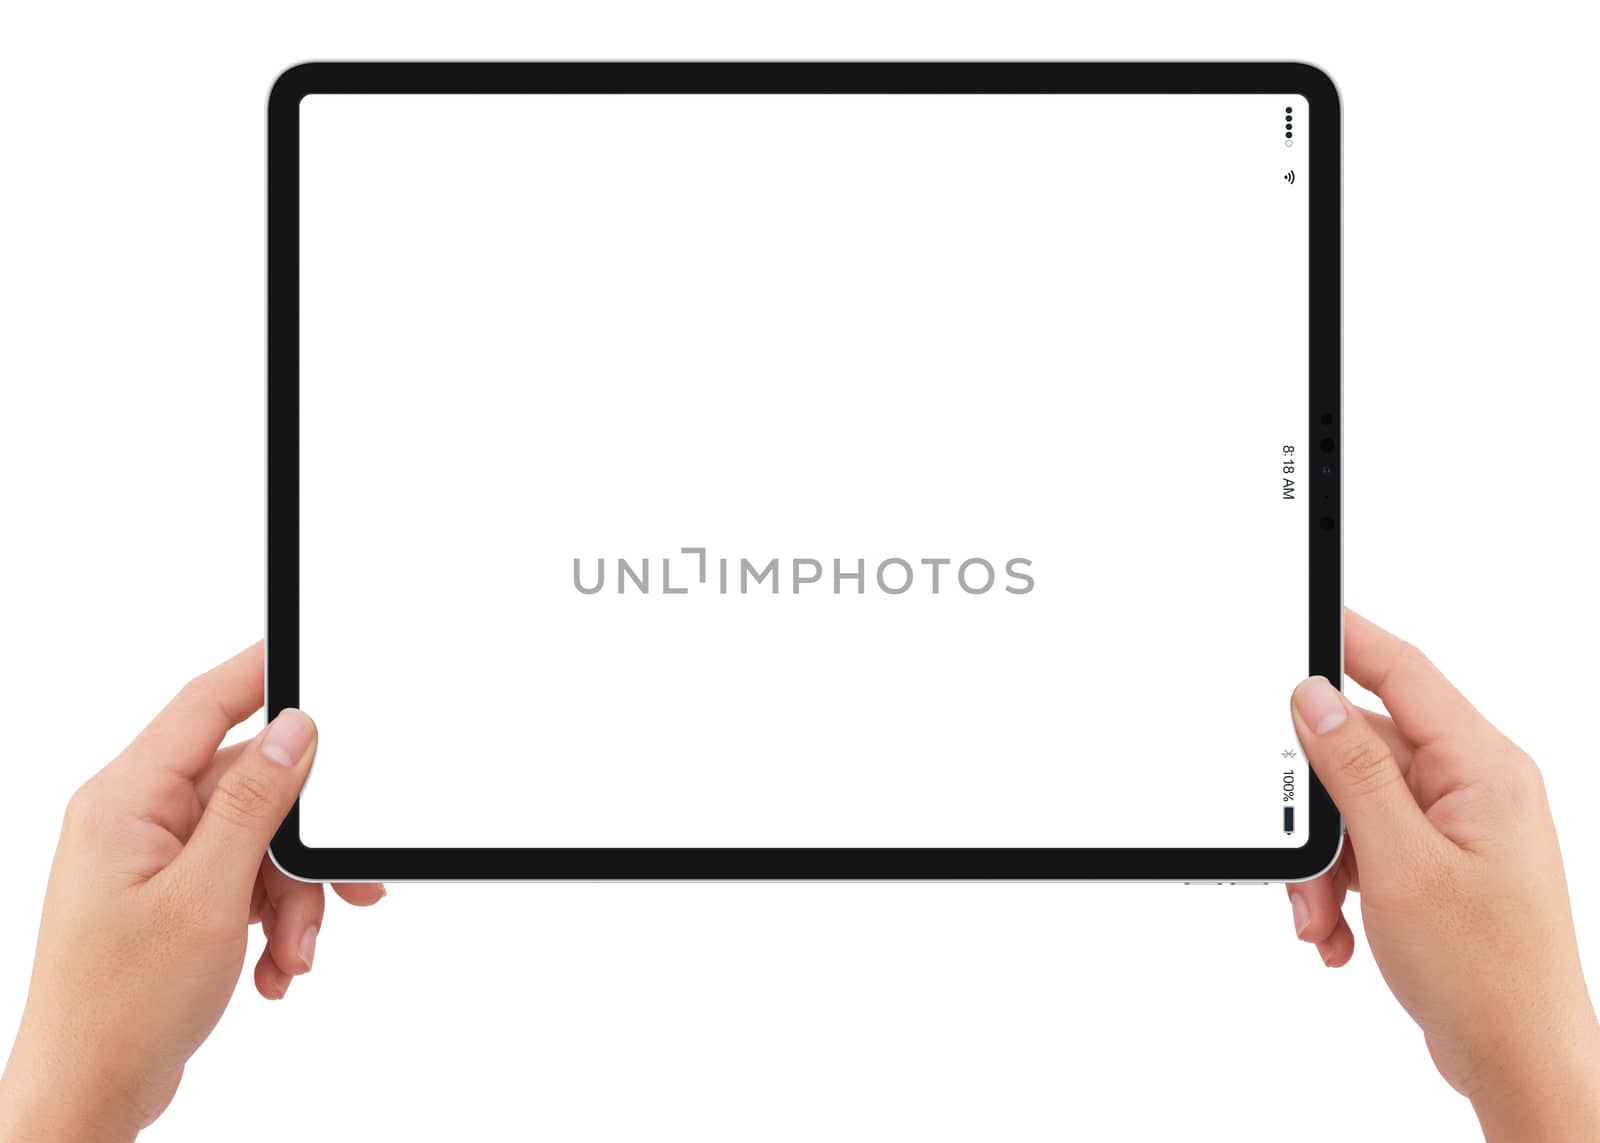 Isolated human left hand holding white tablet computer white screen mockup on white background